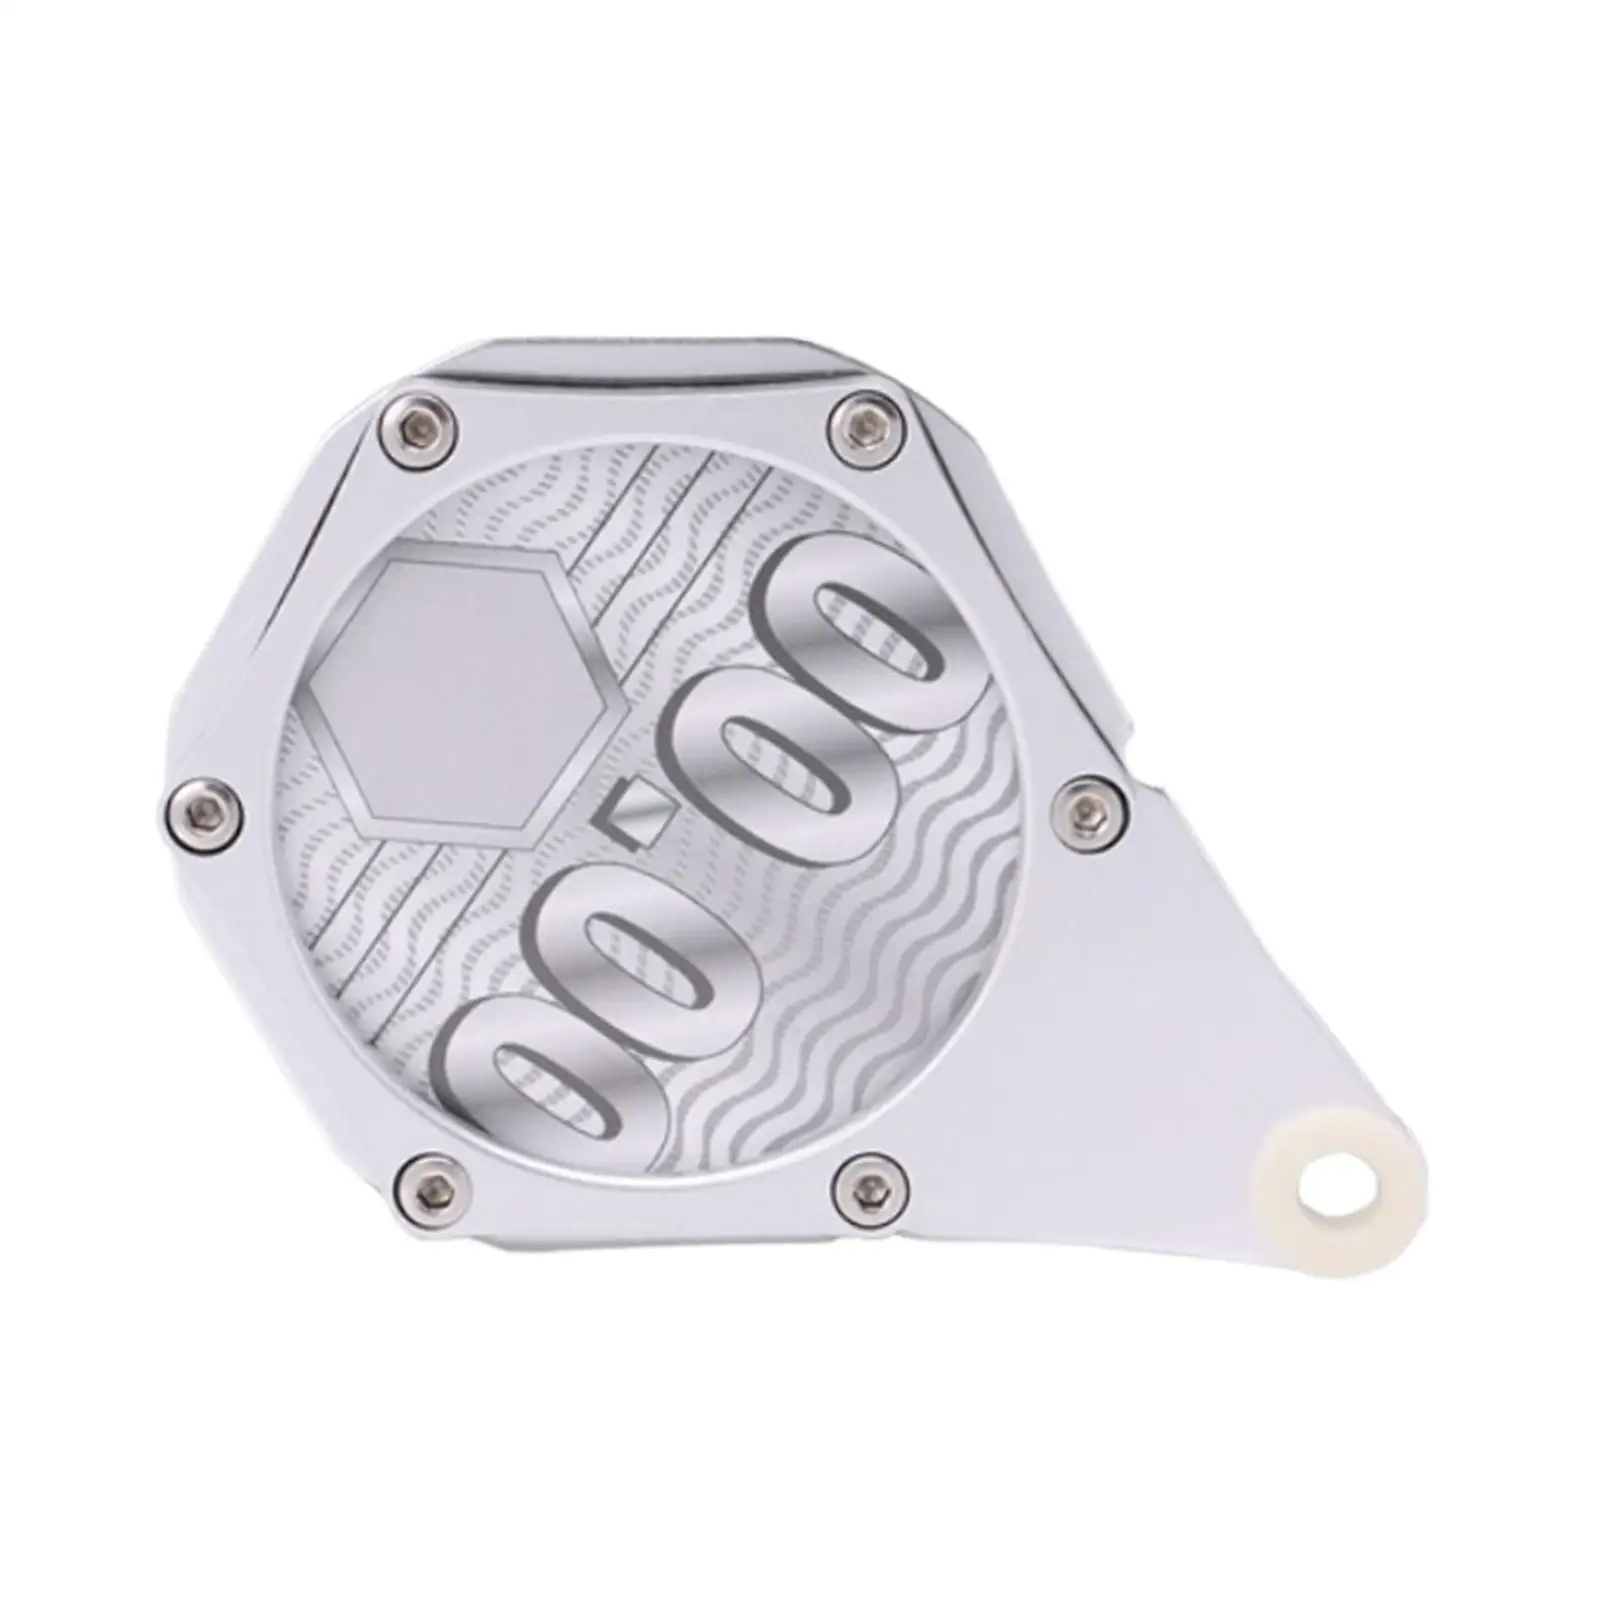 Hexagon Tax Disc Plate Tax Disc Holder for Bike Motor Easy to Mount